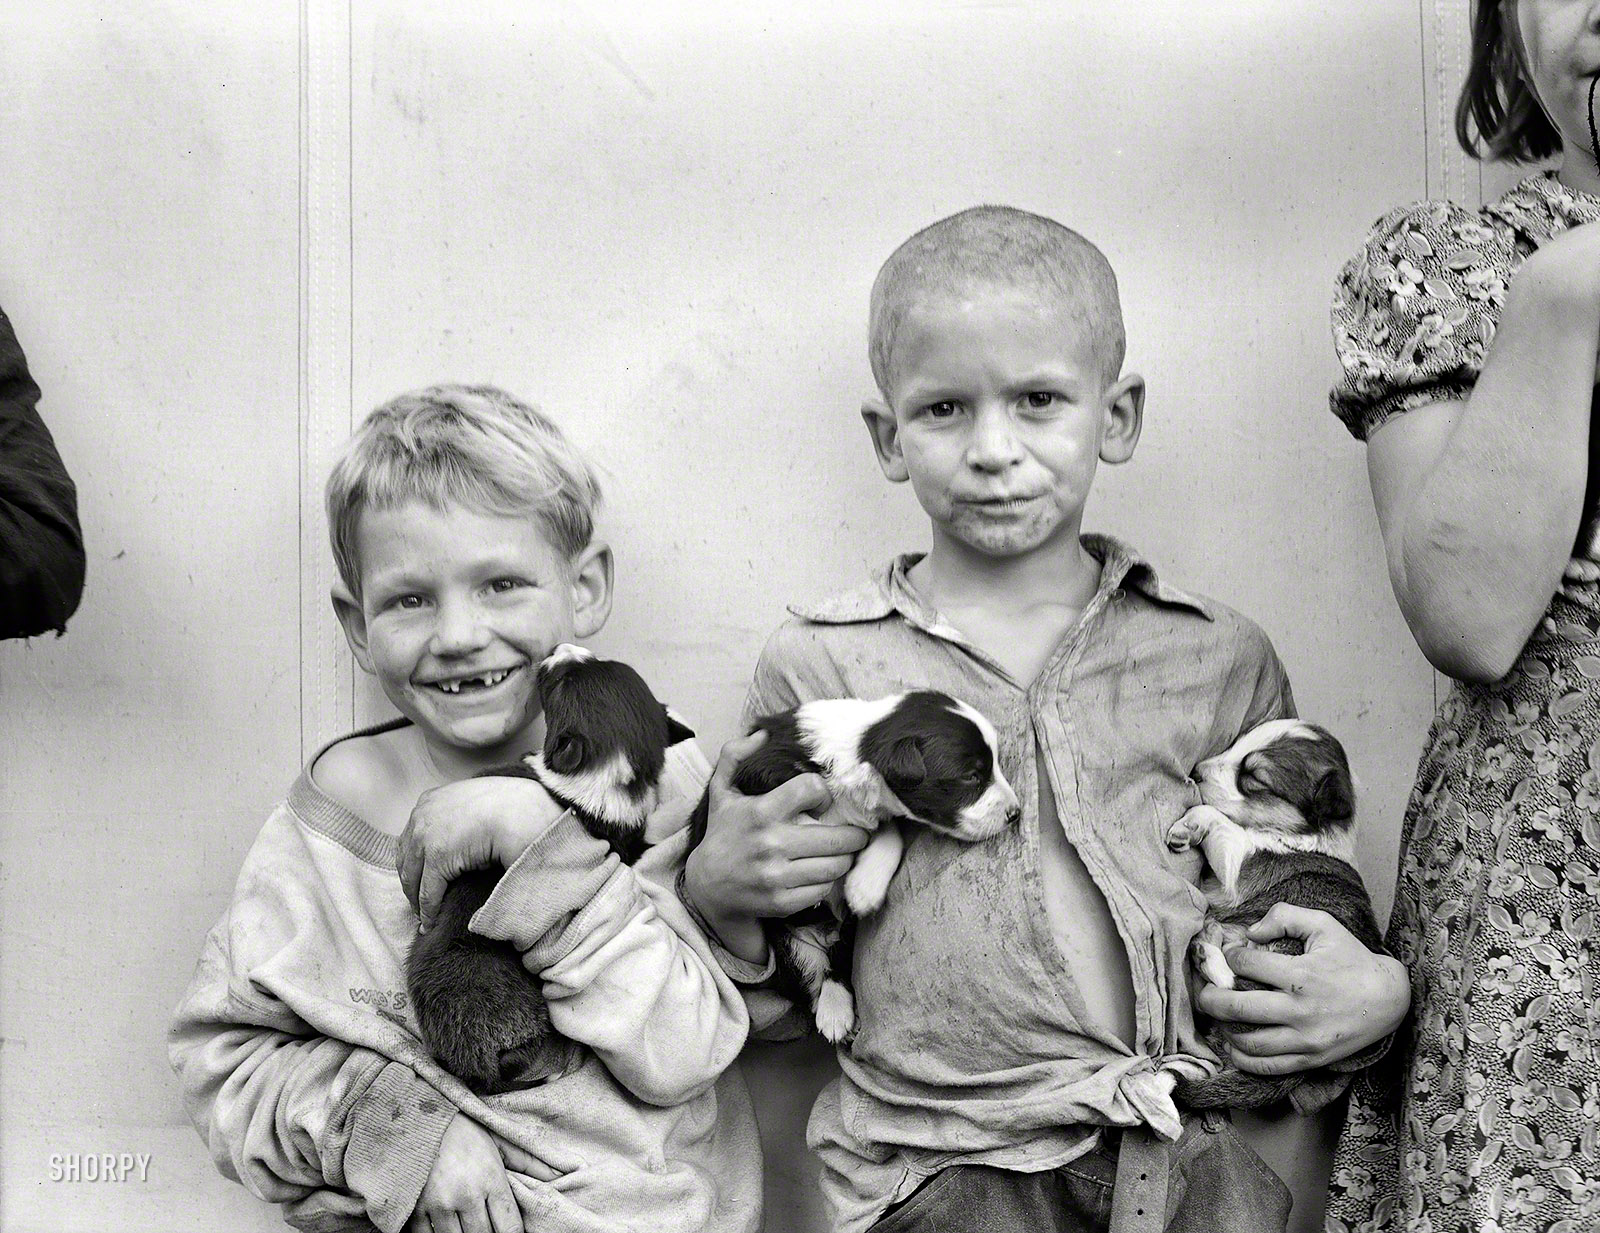 November 1938. "Shafter Camp for migrants, California. Cotton picker's children who live in a tent in the government camp instead of along the highway or in a ditch." Photo by Dorothea Lange, Resettlement Administration. View full size.